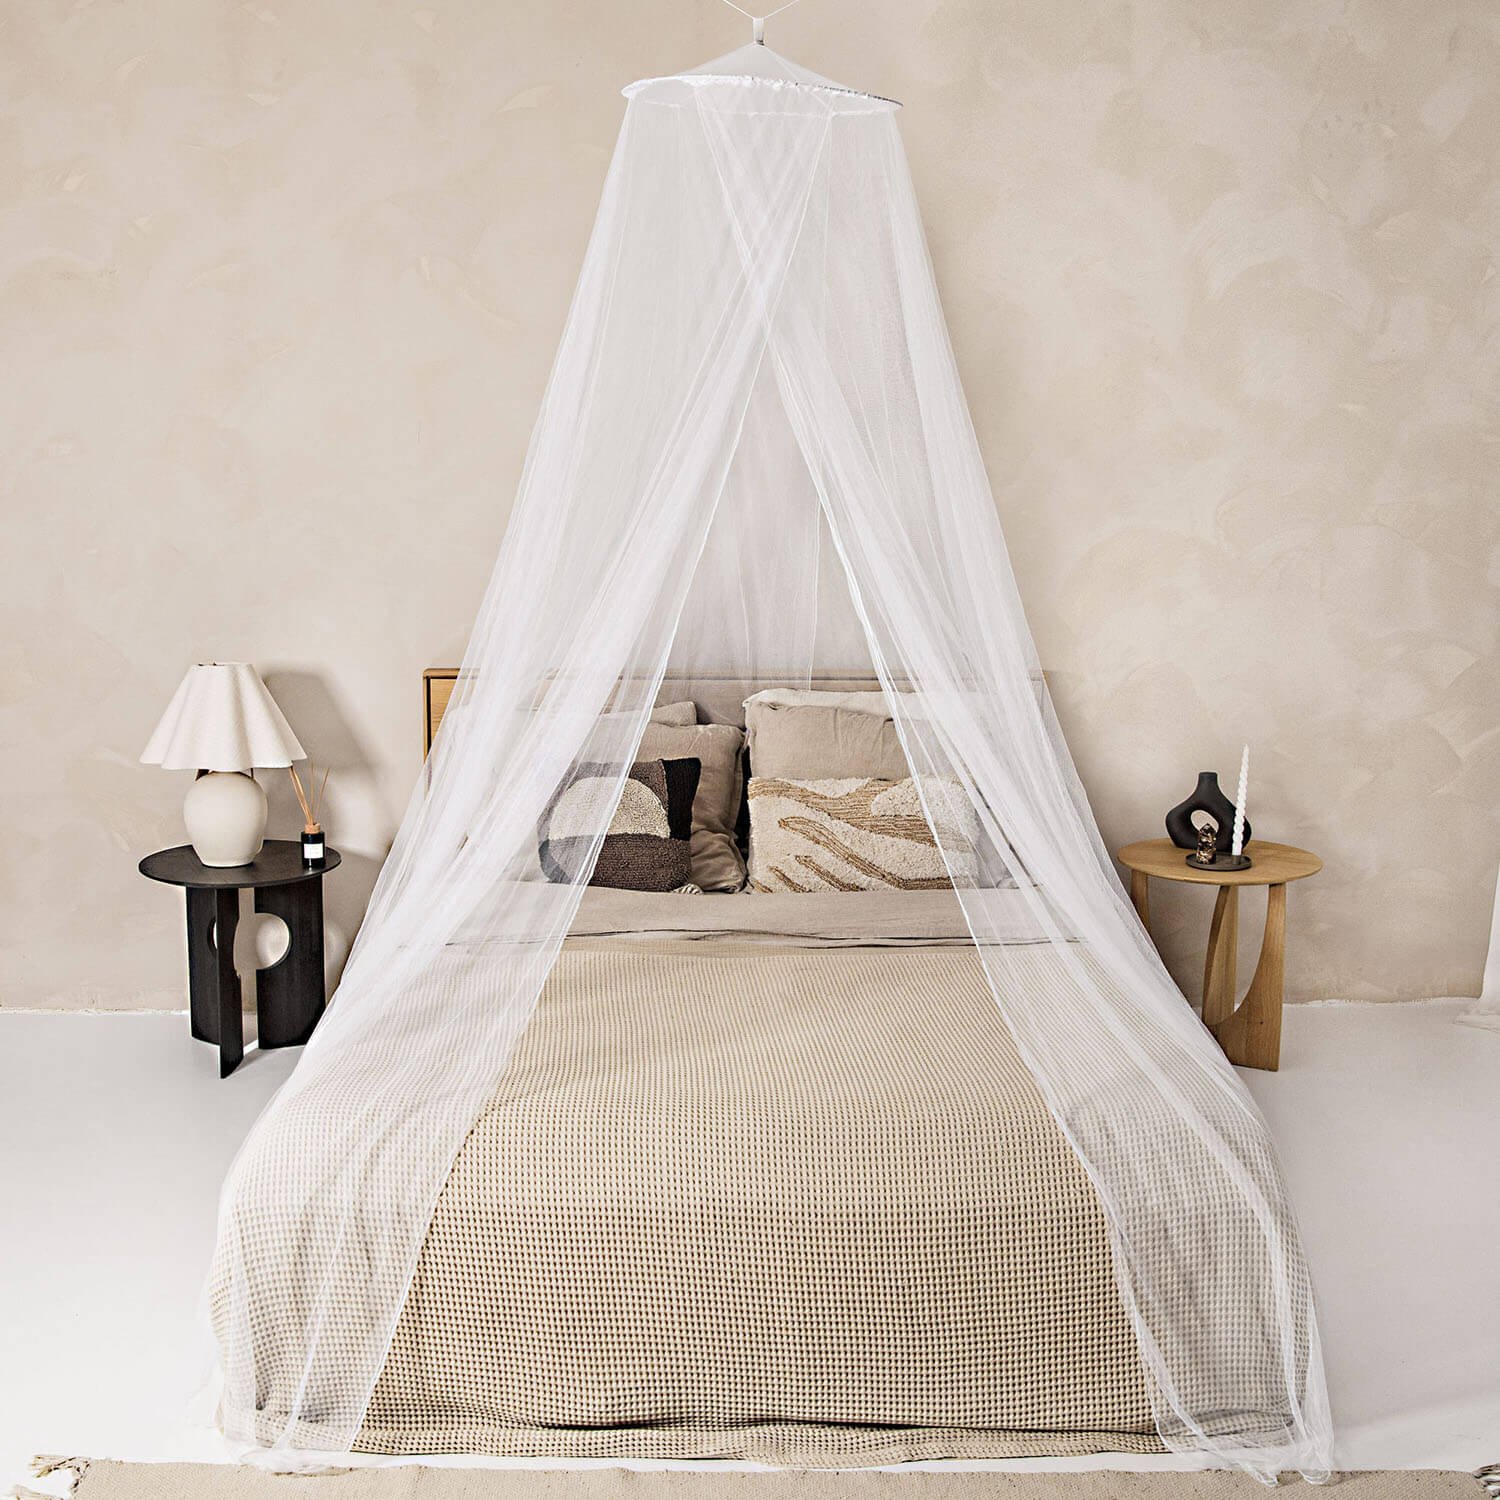 White conical round mosquito net for bed canopy travel netting curtains